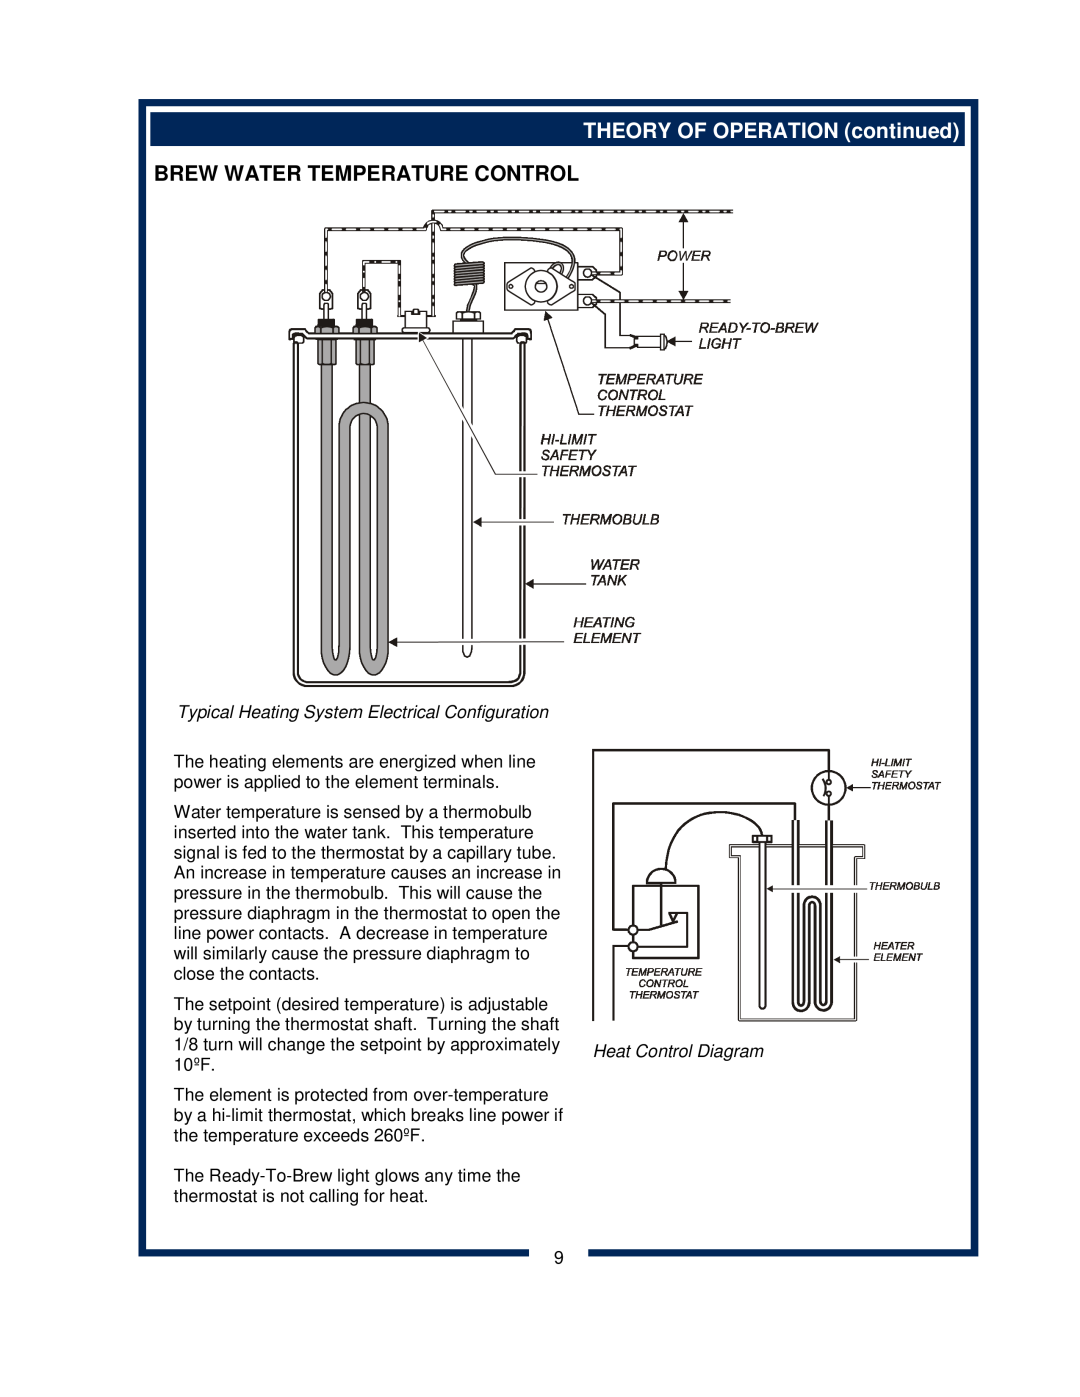 Bloomfield 600 manual Brew Water Temperature Control, THEORY OF OPERATION continued 